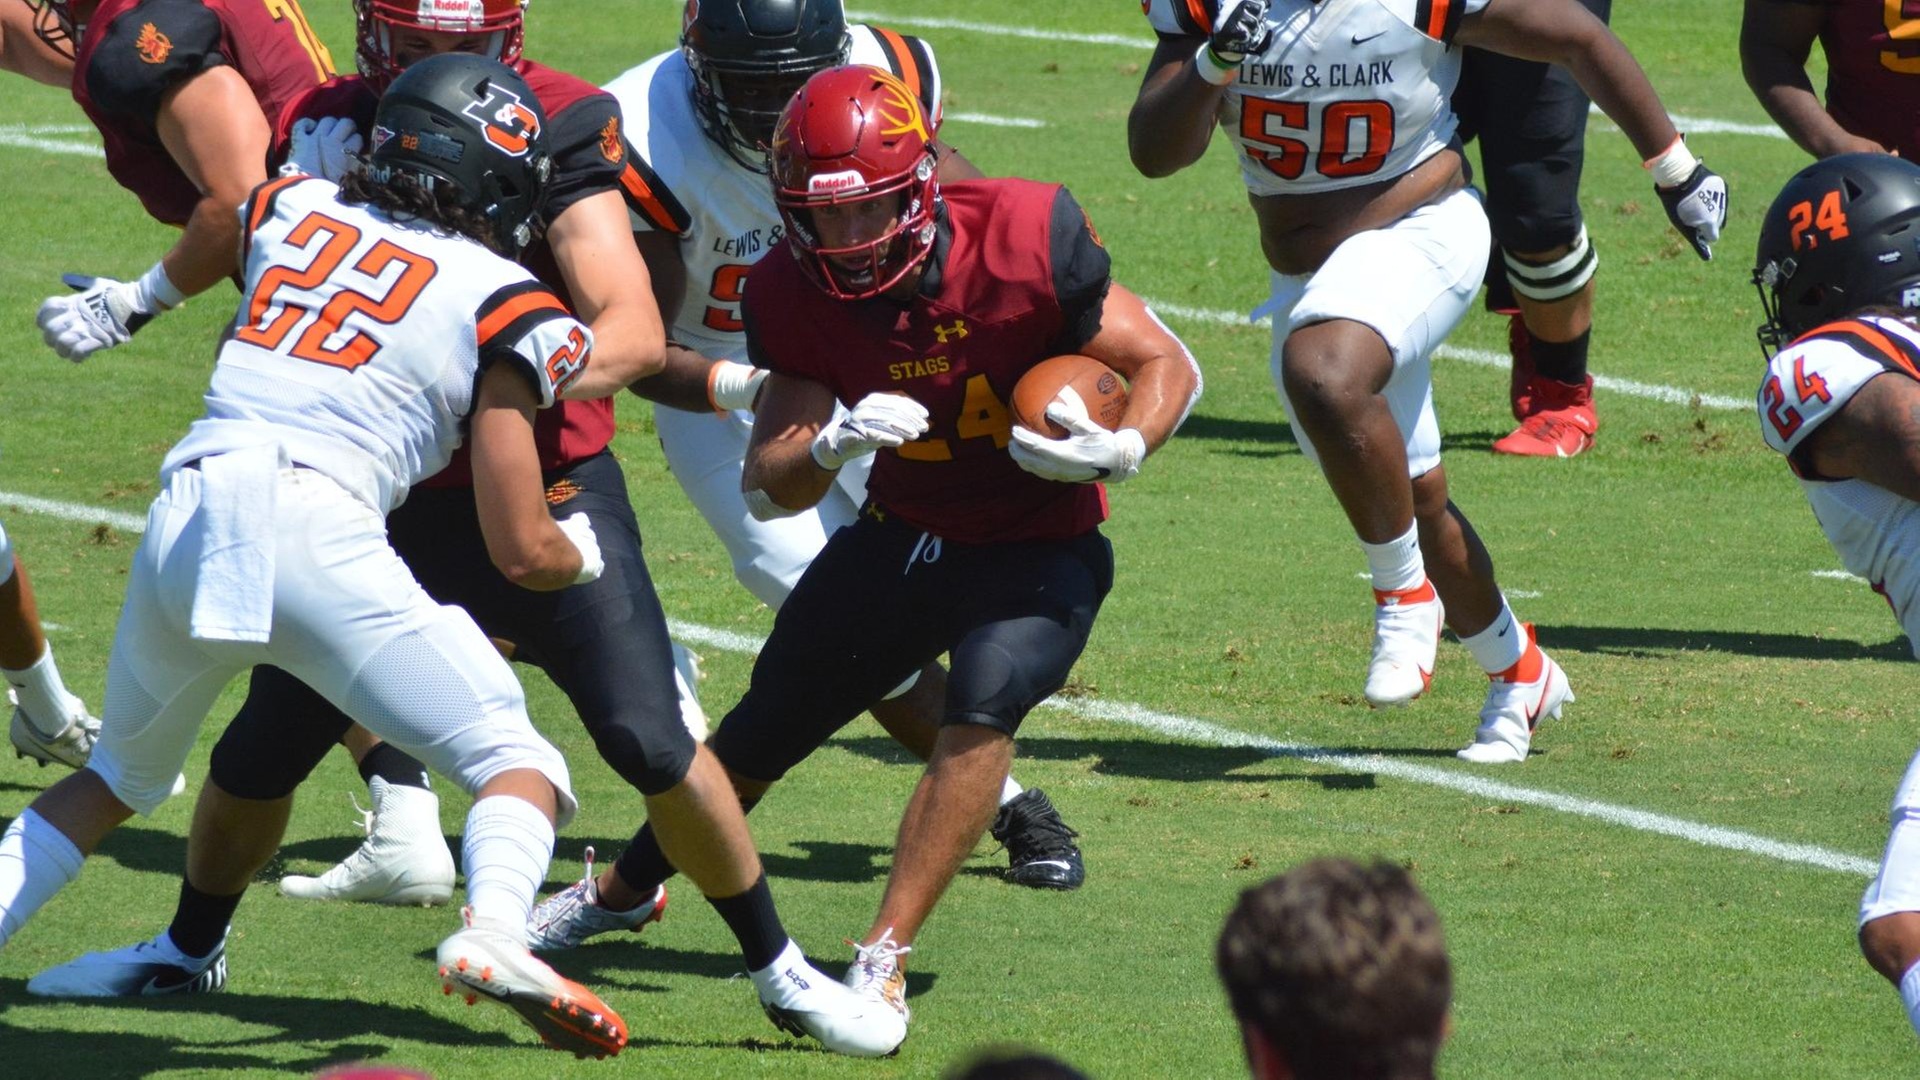 Jacob Fenton had his first collegiate touchdown for the Stags (photo by Tessa Guerra)